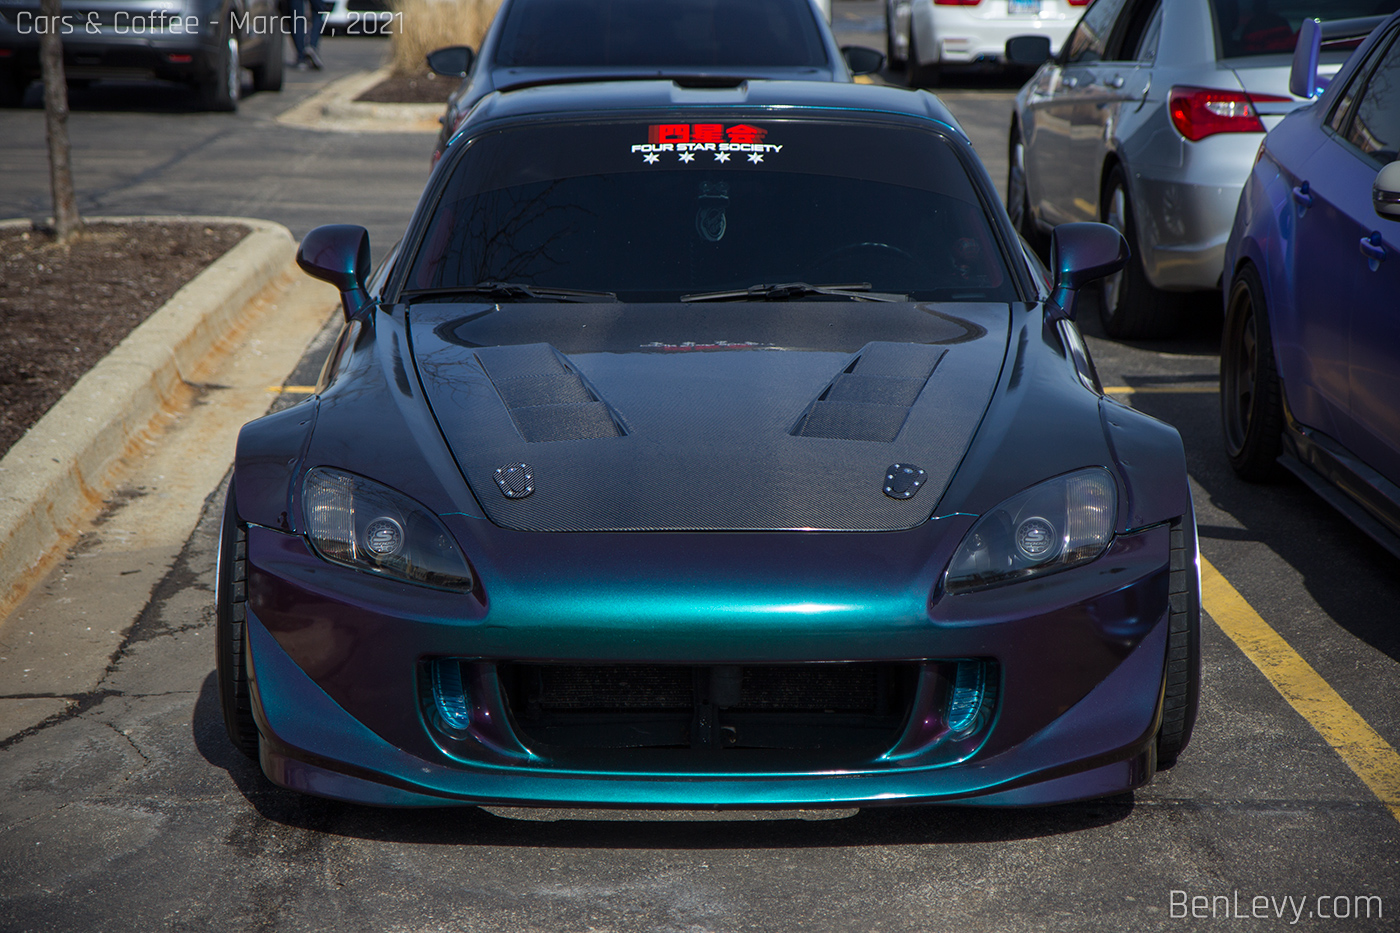 Honda S2000 with color shifting paint